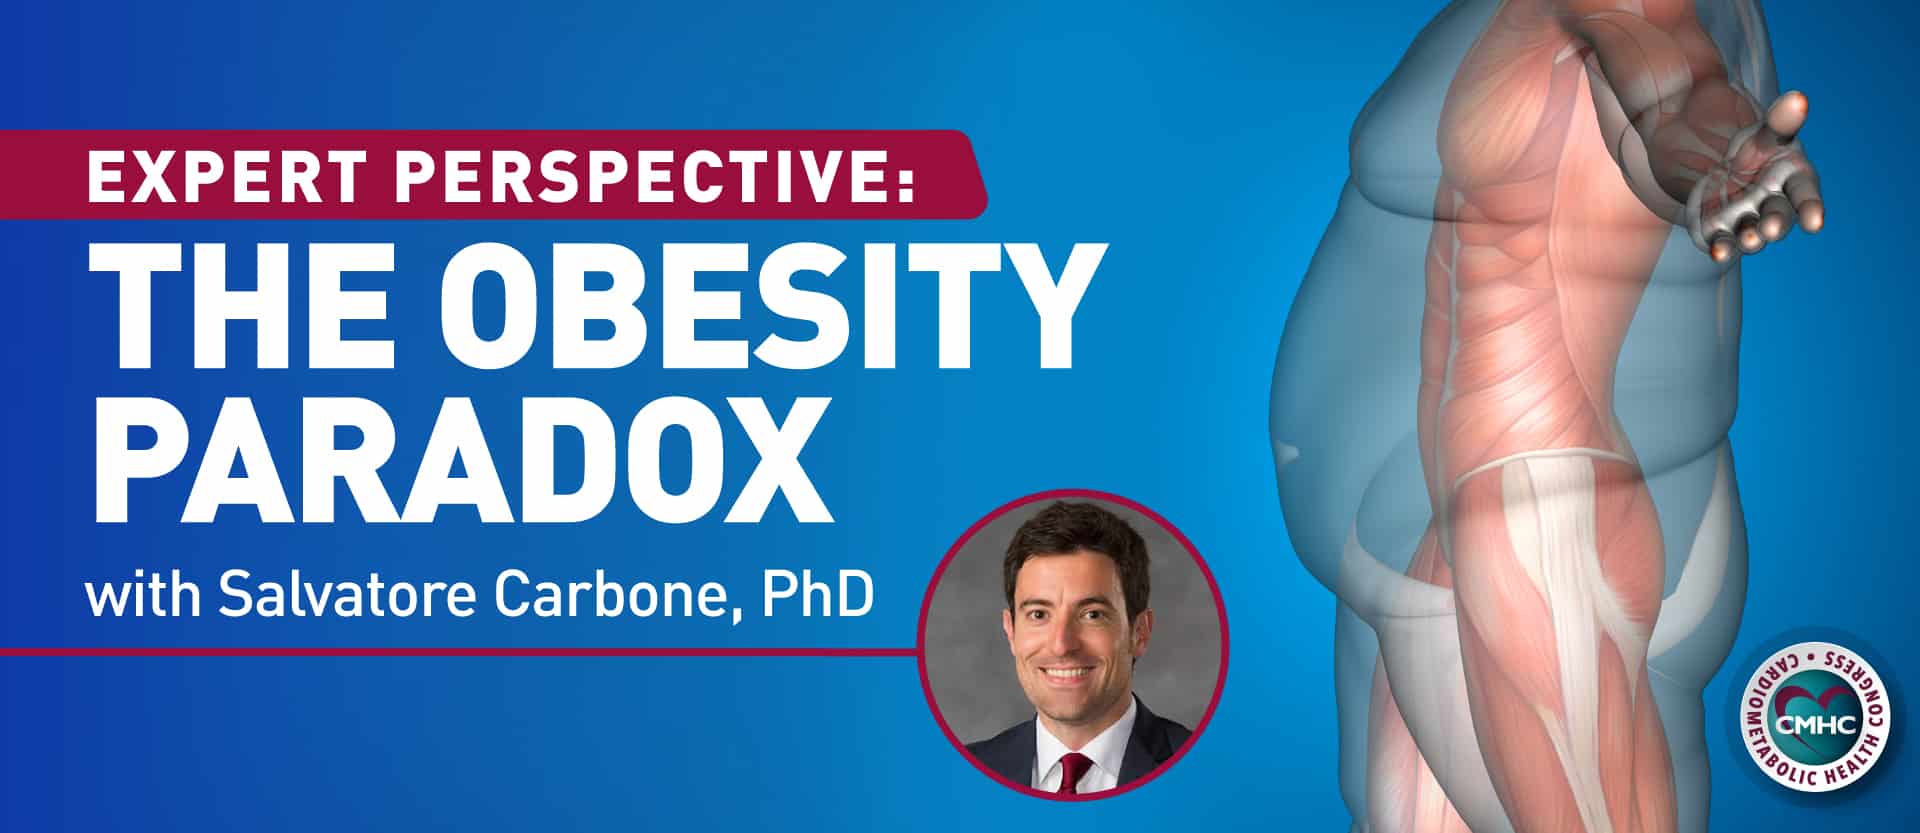 Expert Perspective: The Obesity Paradox with Salvatore Carbone, PhD